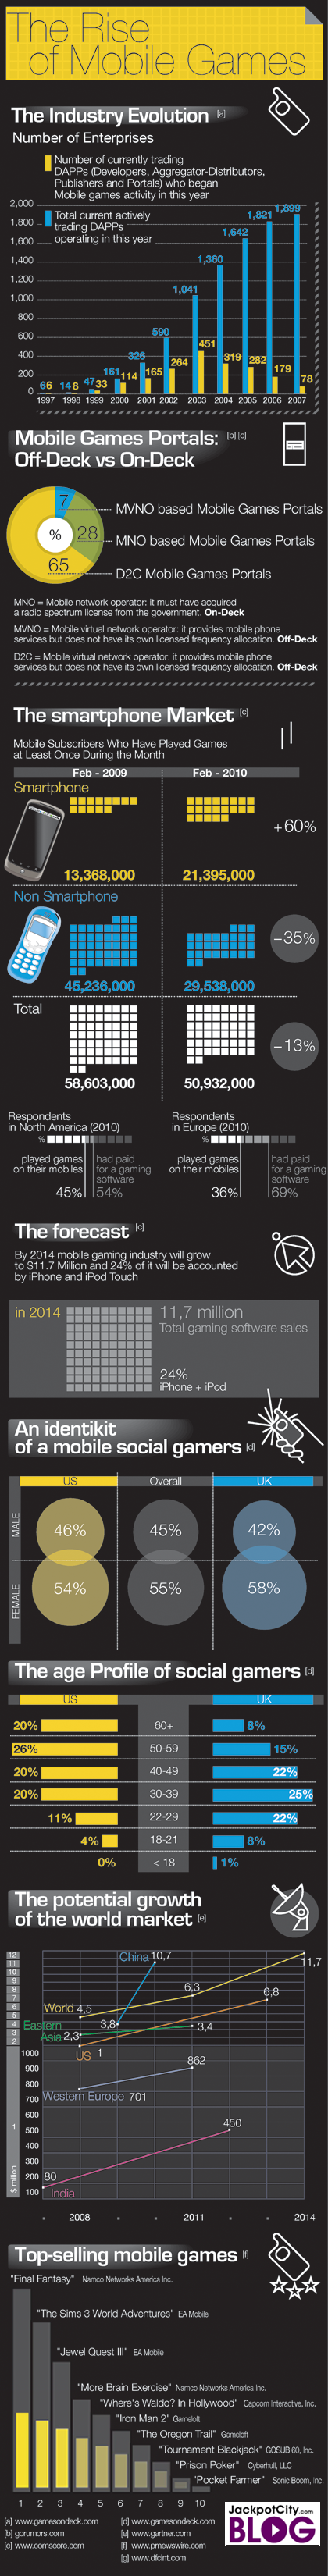 Rise of Mobile Gaming Infographic